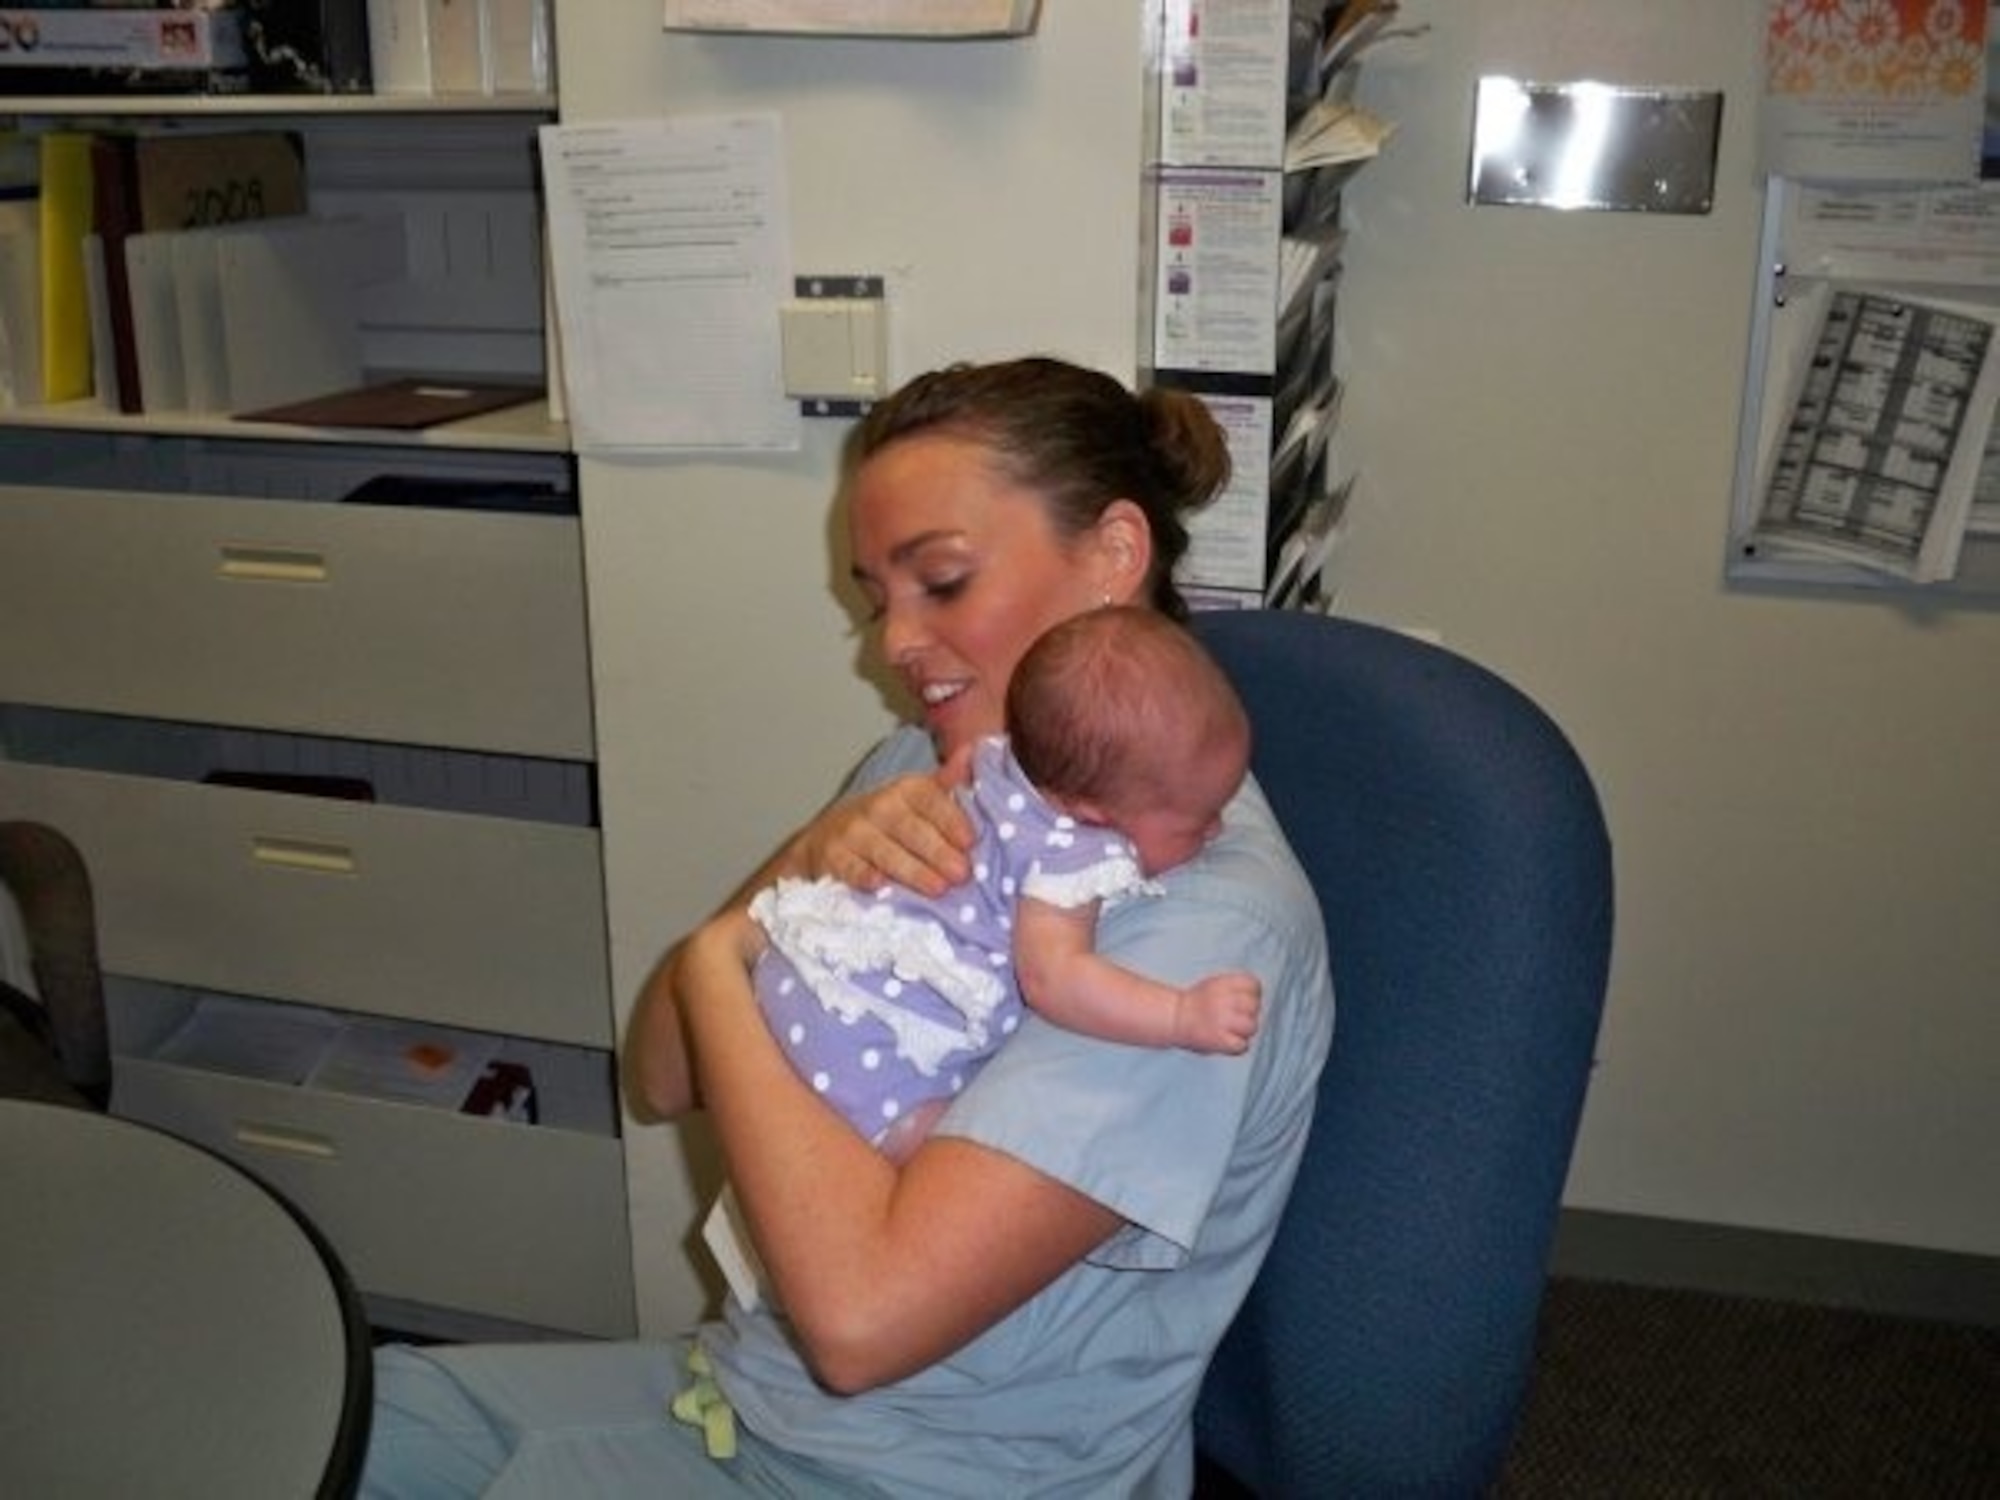 U.S. Air Force Lt. Col. Danielle Merritt, currently serving as the 9th Operational Medical Readiness Squadron commander, holds Charlotte Nowlin, a baby she delivered when she was a lieutenant at Wilford Hall Birthing Center, Lackland Air Force Base, Texas, 2009.